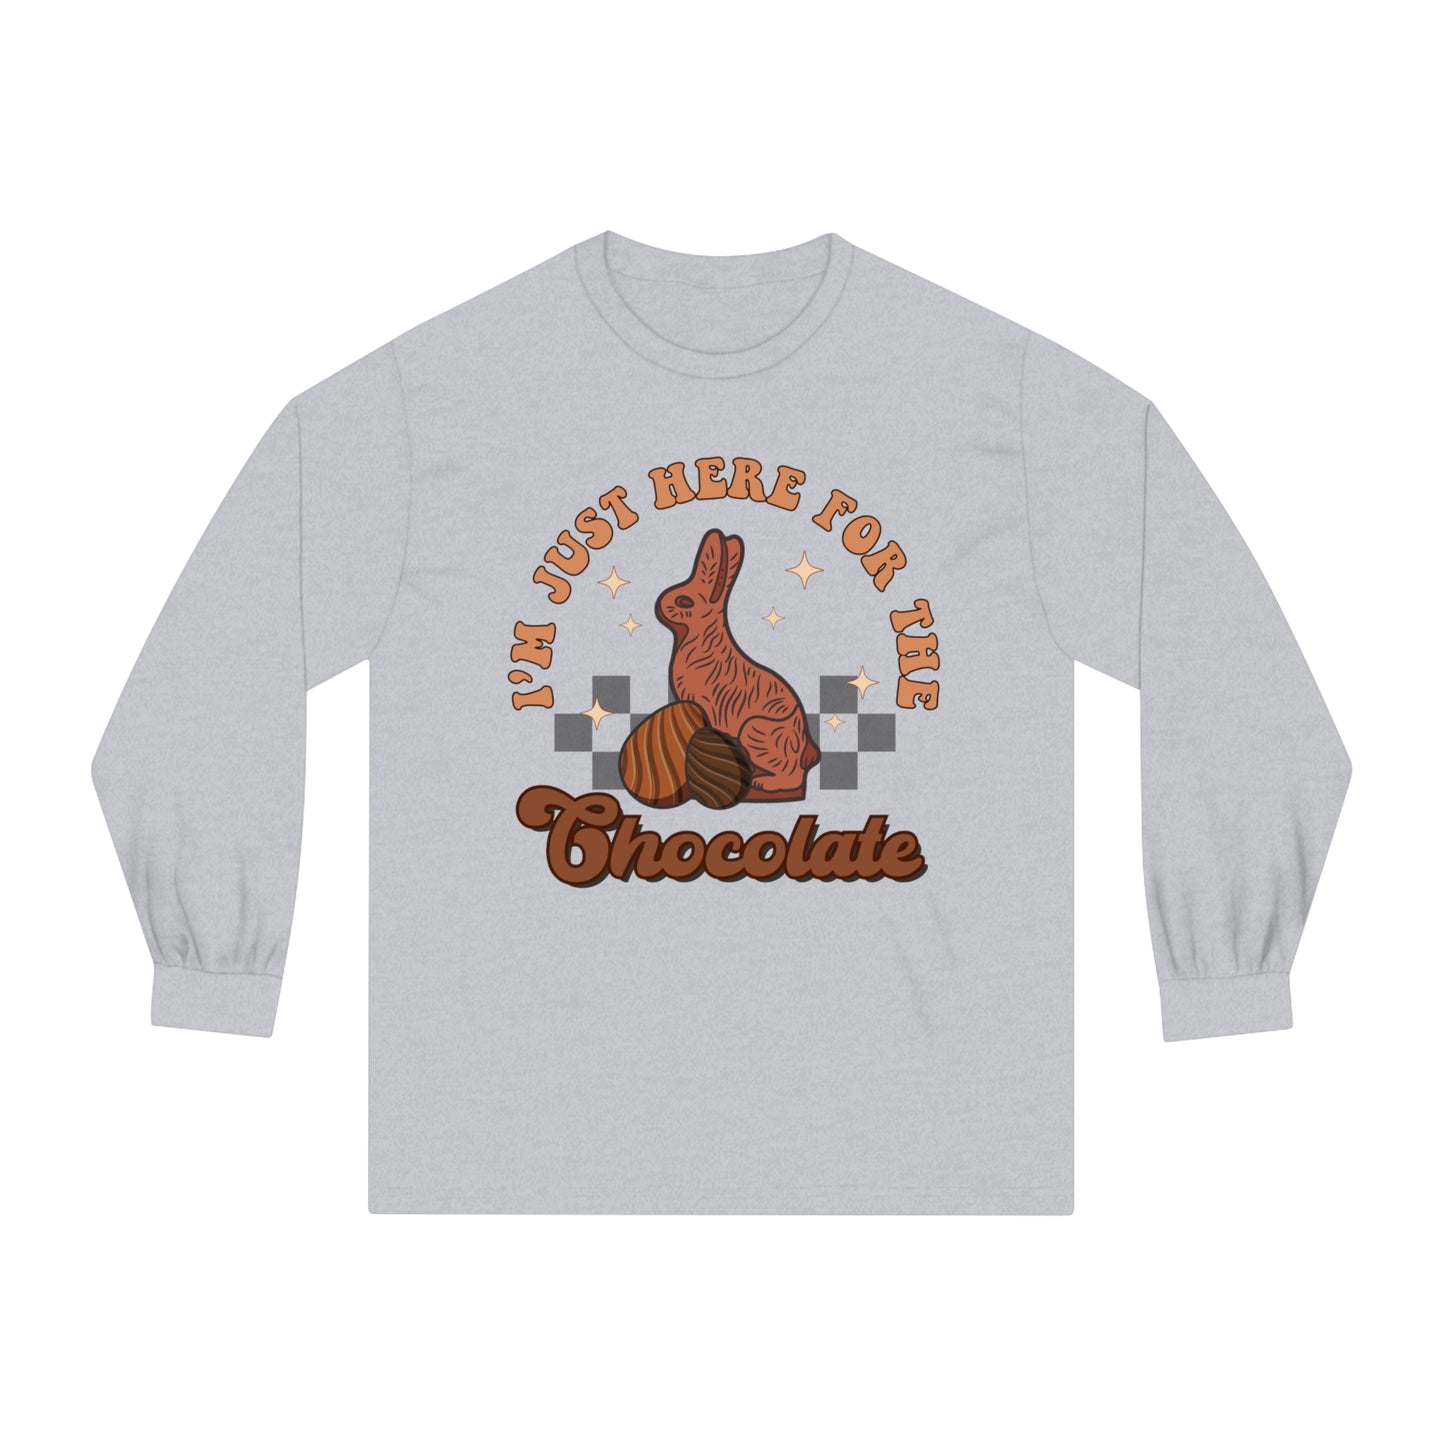 I'm Just Here for the Chocolate - Unisex Classic Long Sleeve T-Shirt